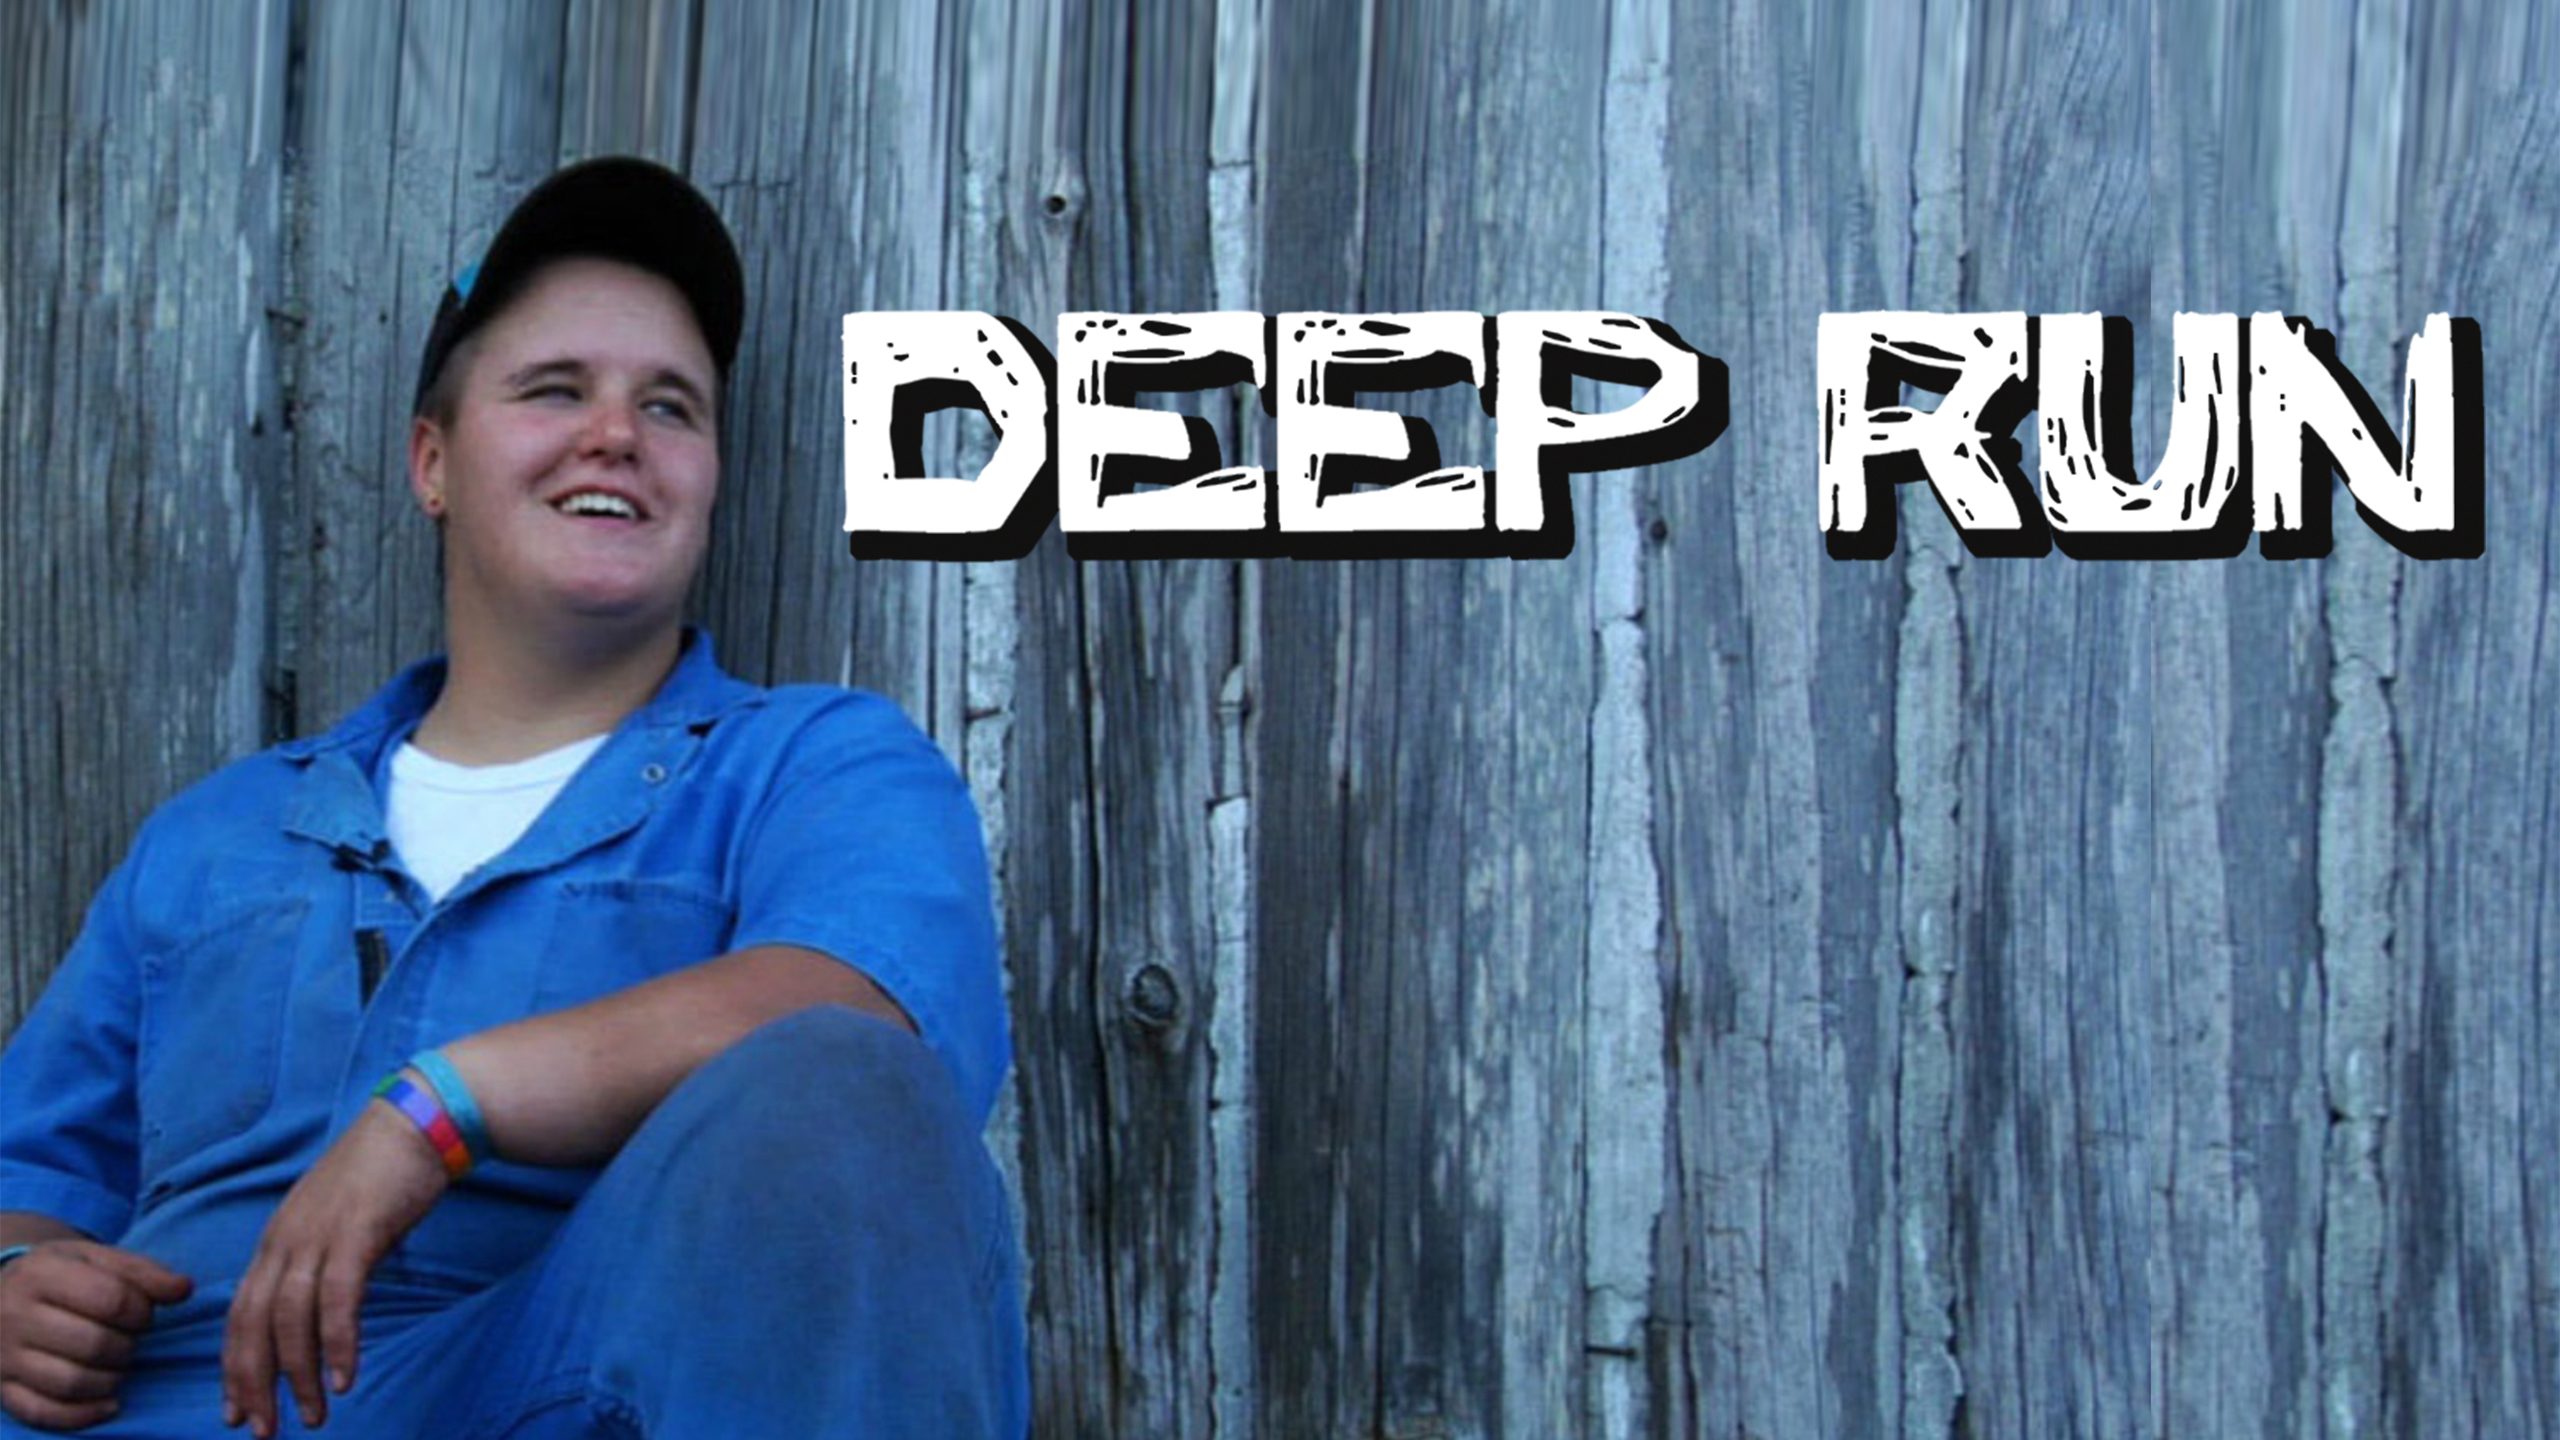 deep run is a powerful verité portrait of trans life in rural north carolina